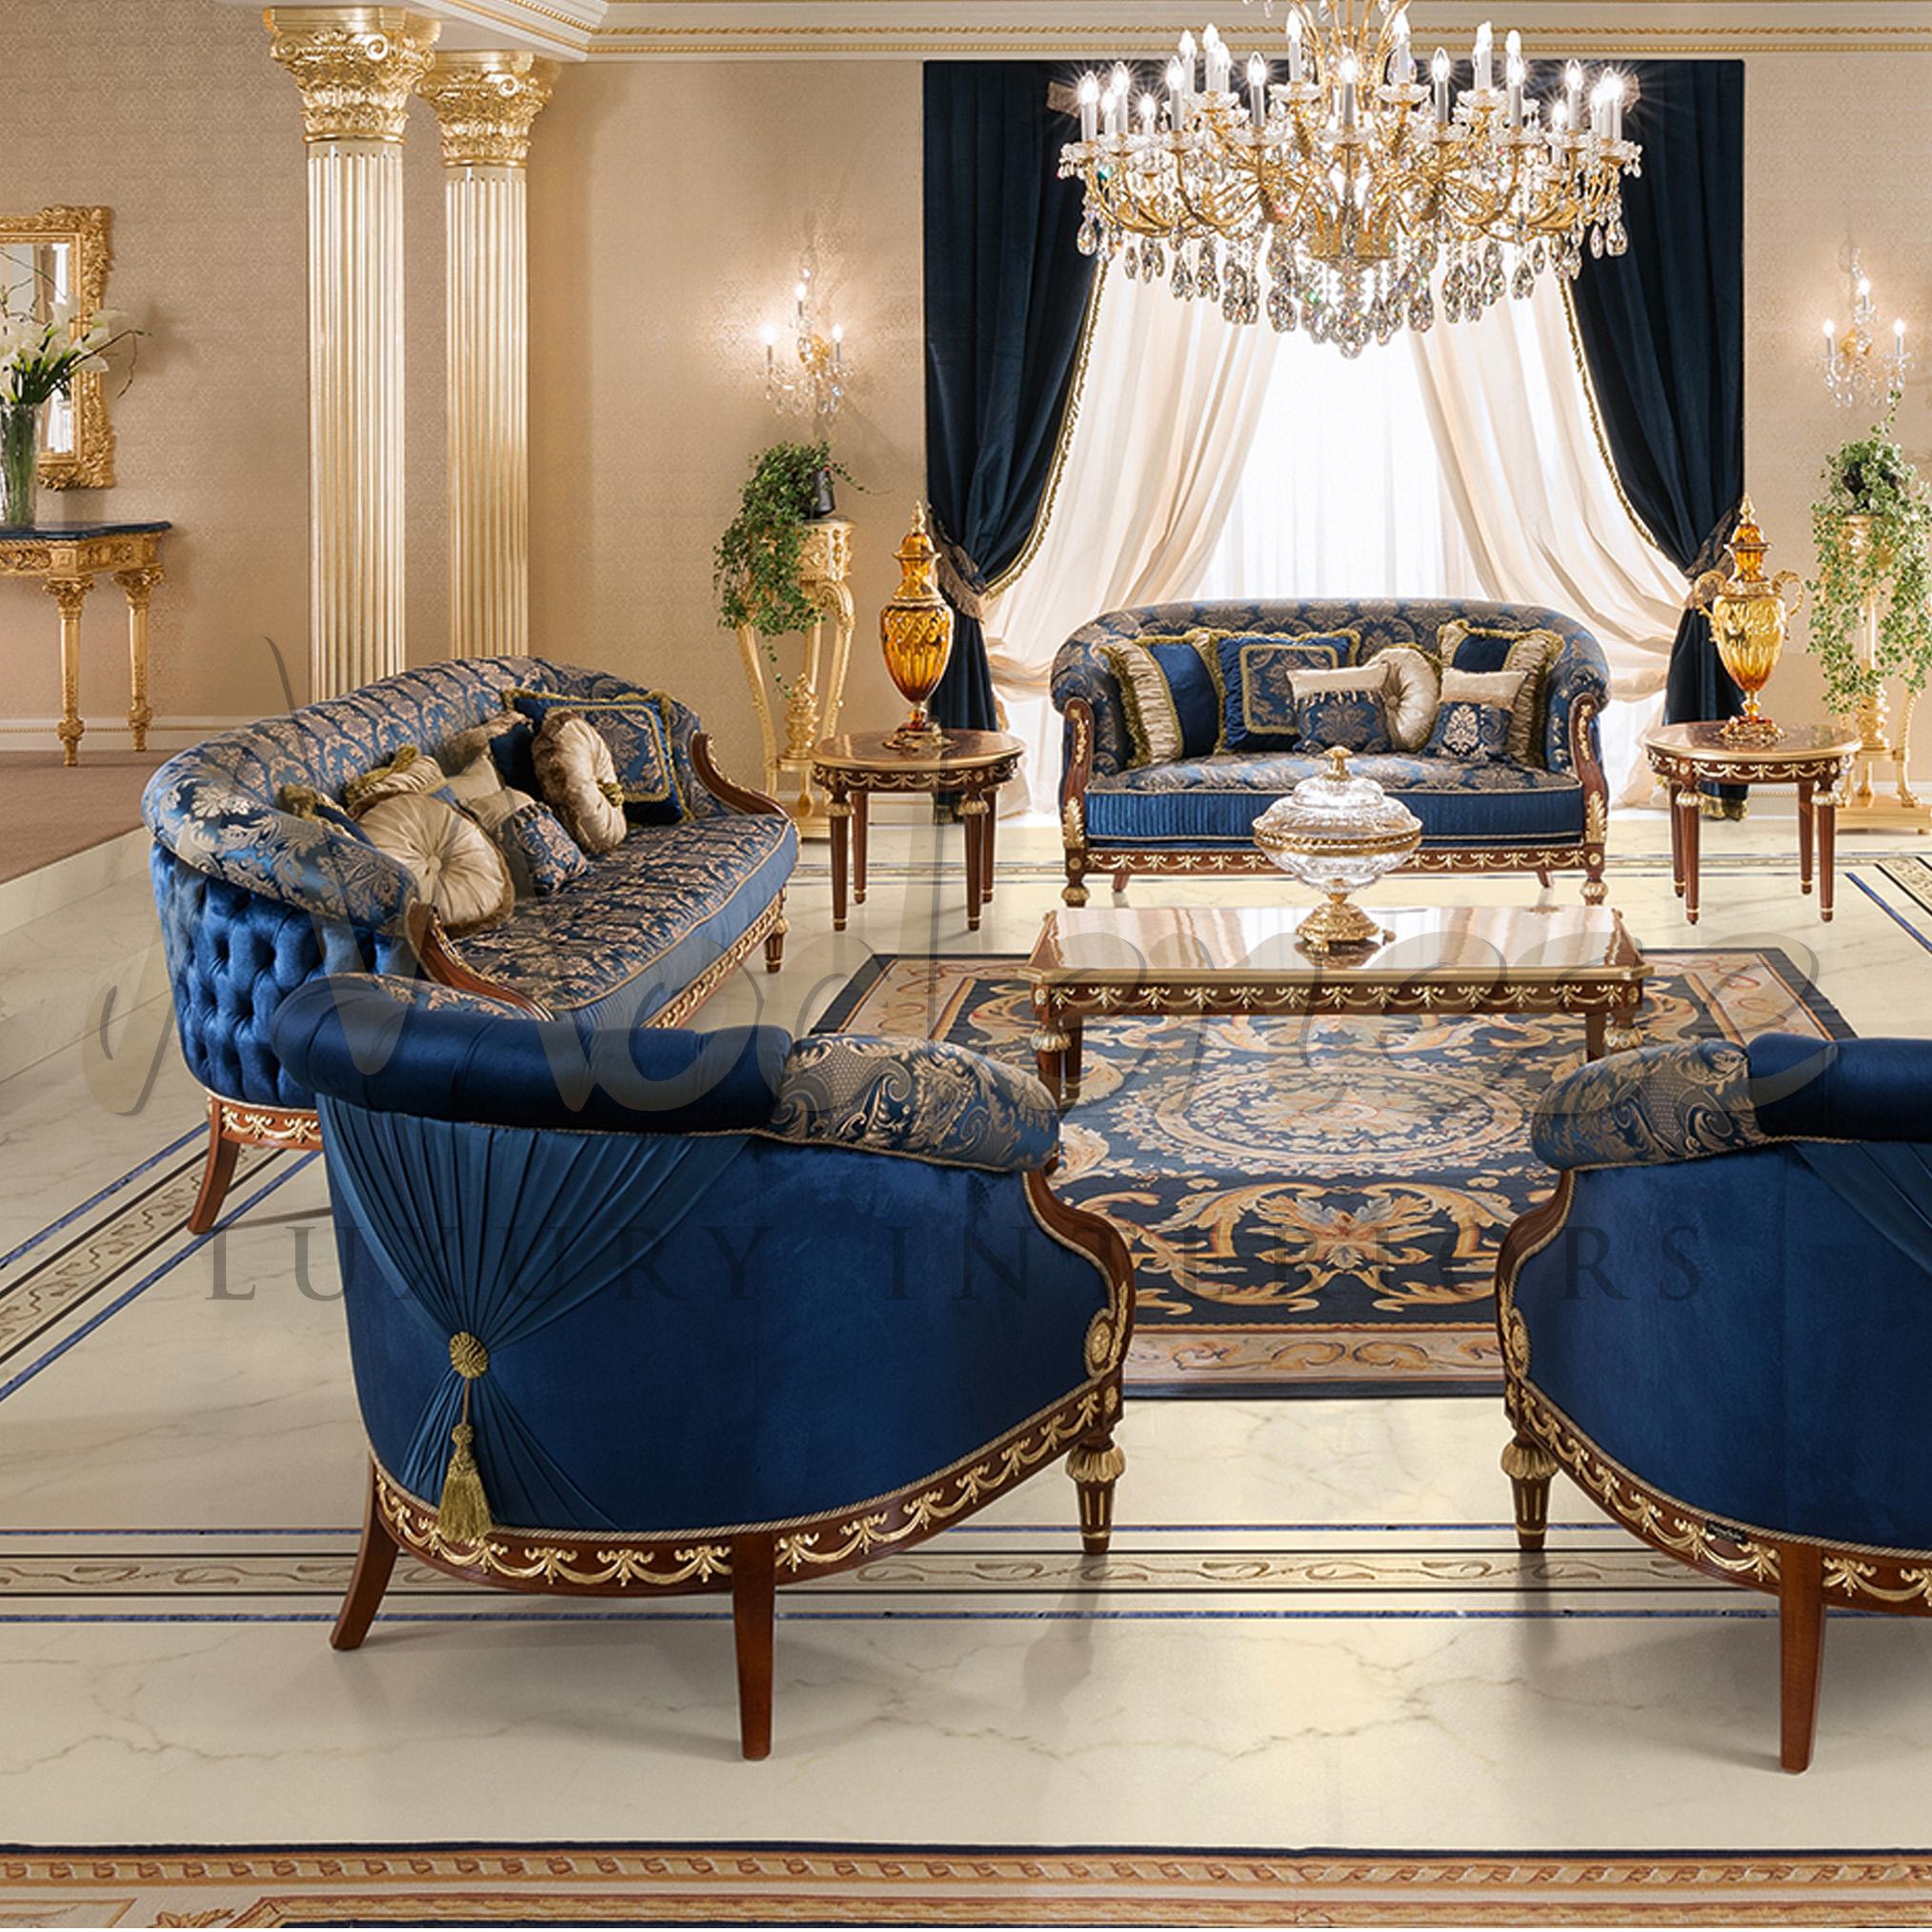 Hand-Crafted  Royal Neoclassical Sofa in High Quality Cherry Wood and Shiny Gold Leaf Decor For Sale